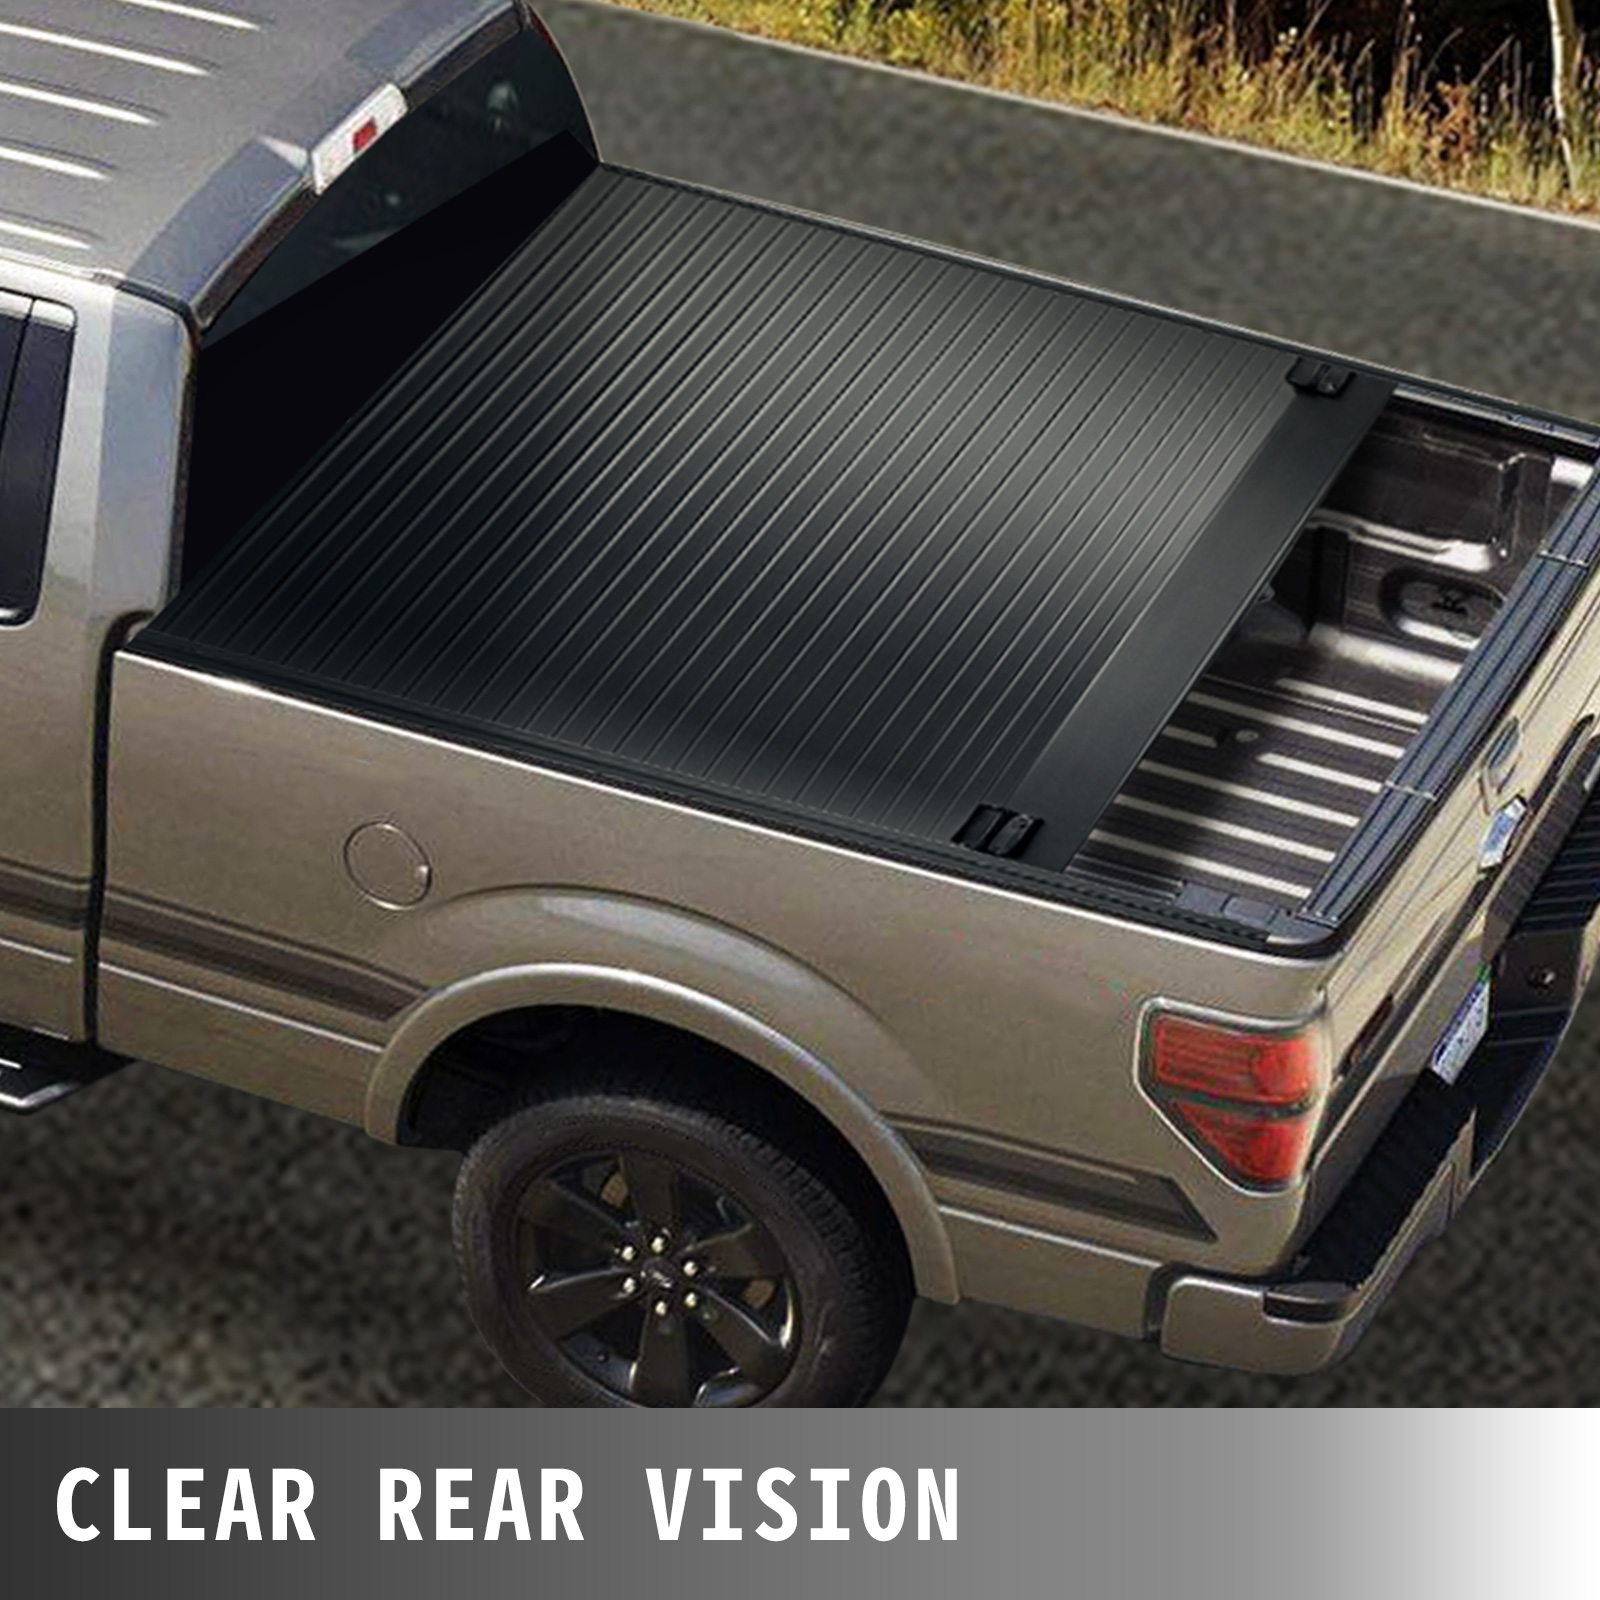 Tonneau Cover for Ford F-150 2010-2020 5.5ft Short Hard Retractable